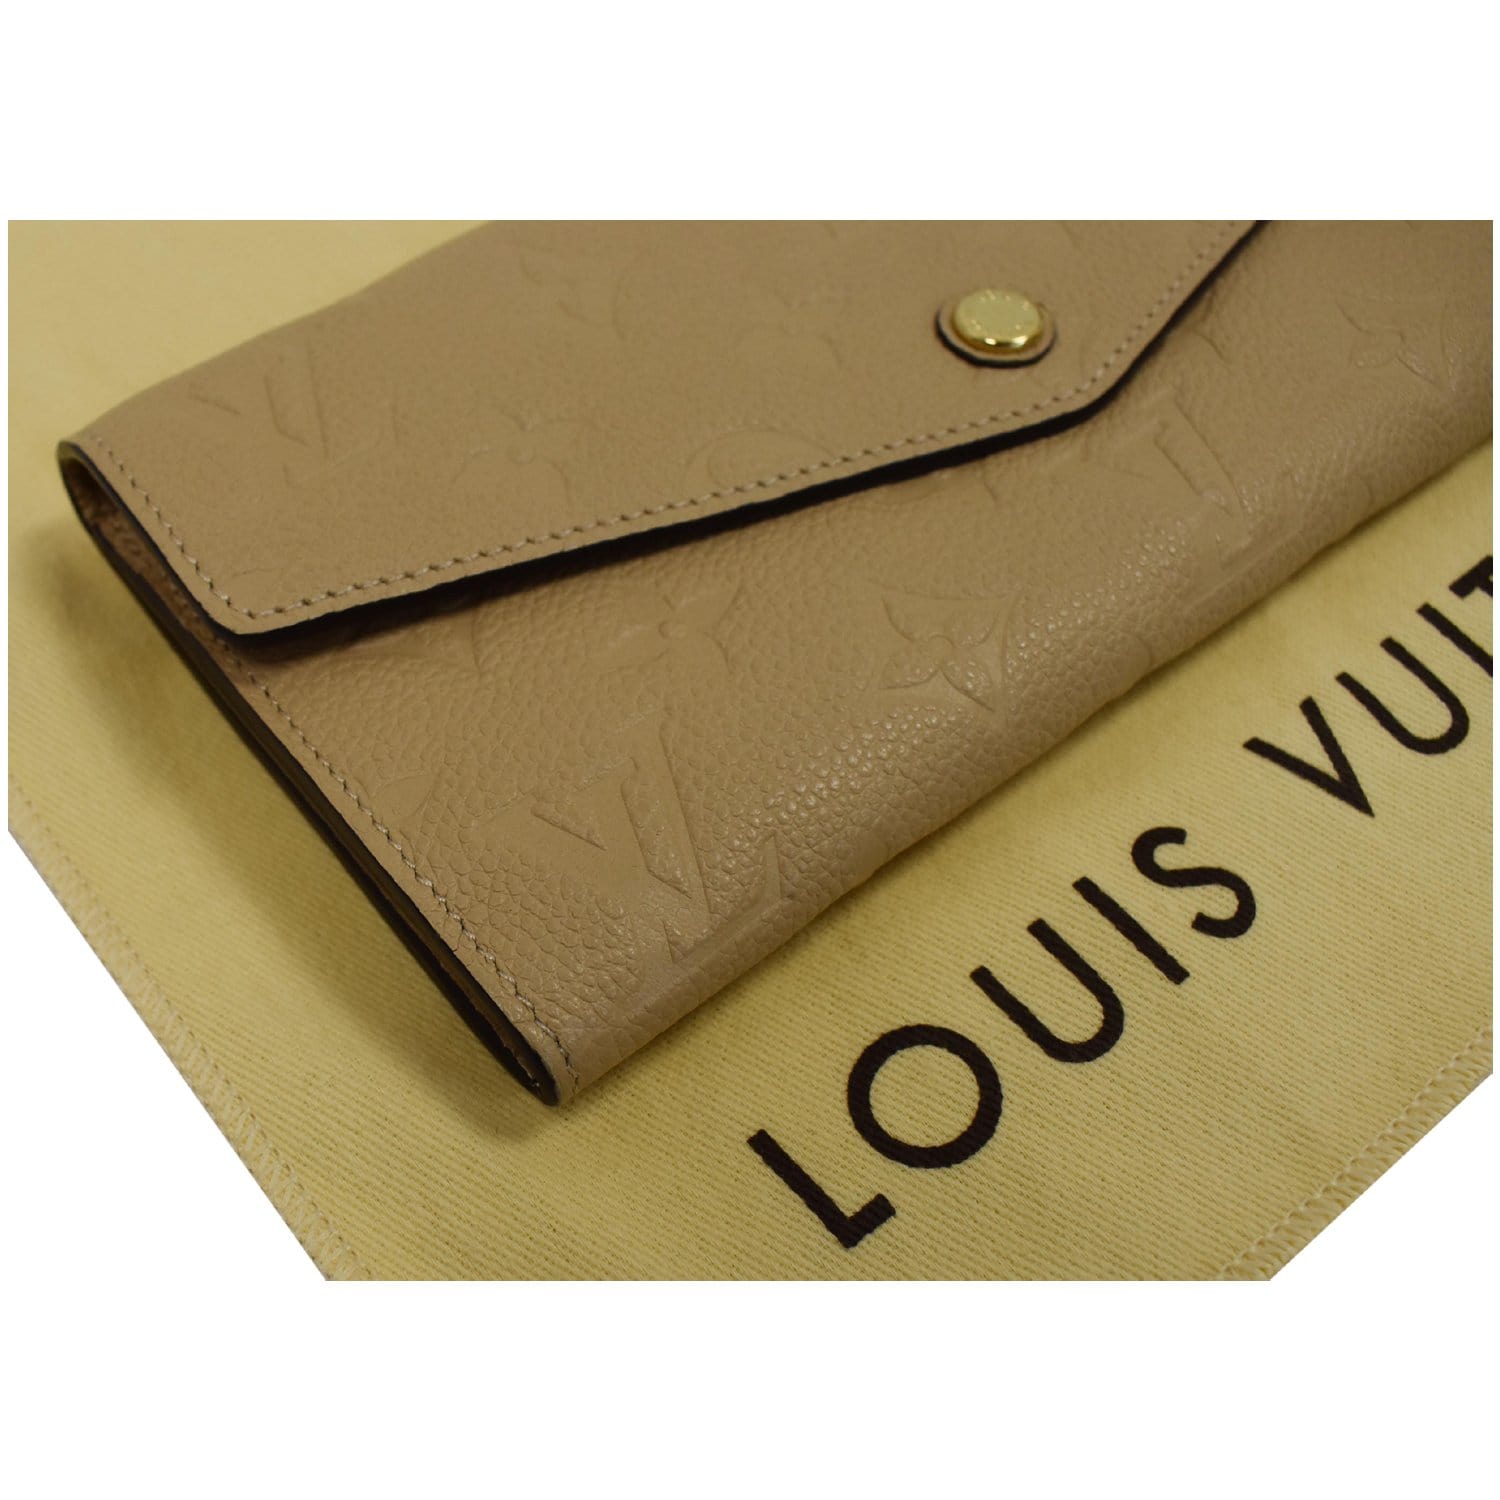 Louis Vuitton Curieuse Wallet, Small Leather Goods - Designer